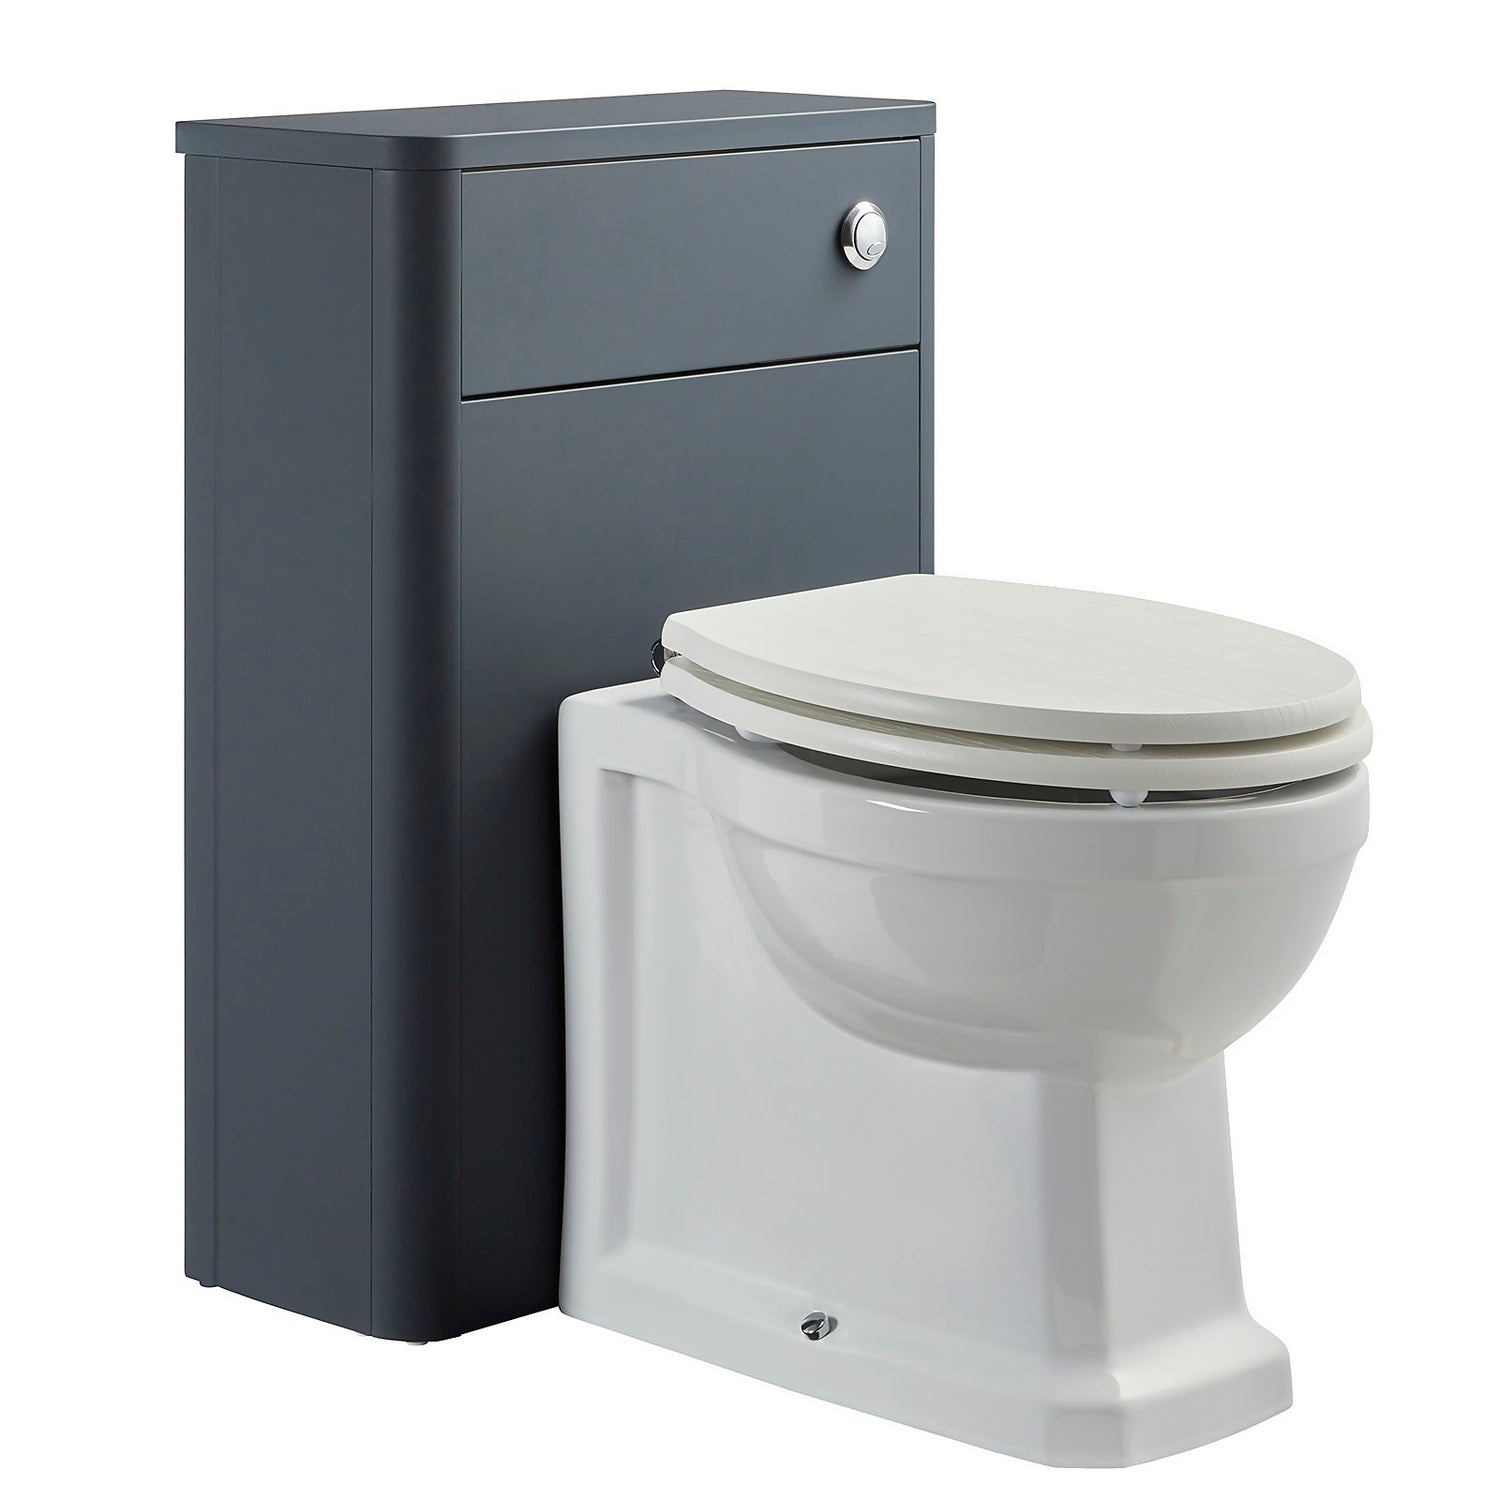 Country Living Wicklow Toilet Unit - Navy